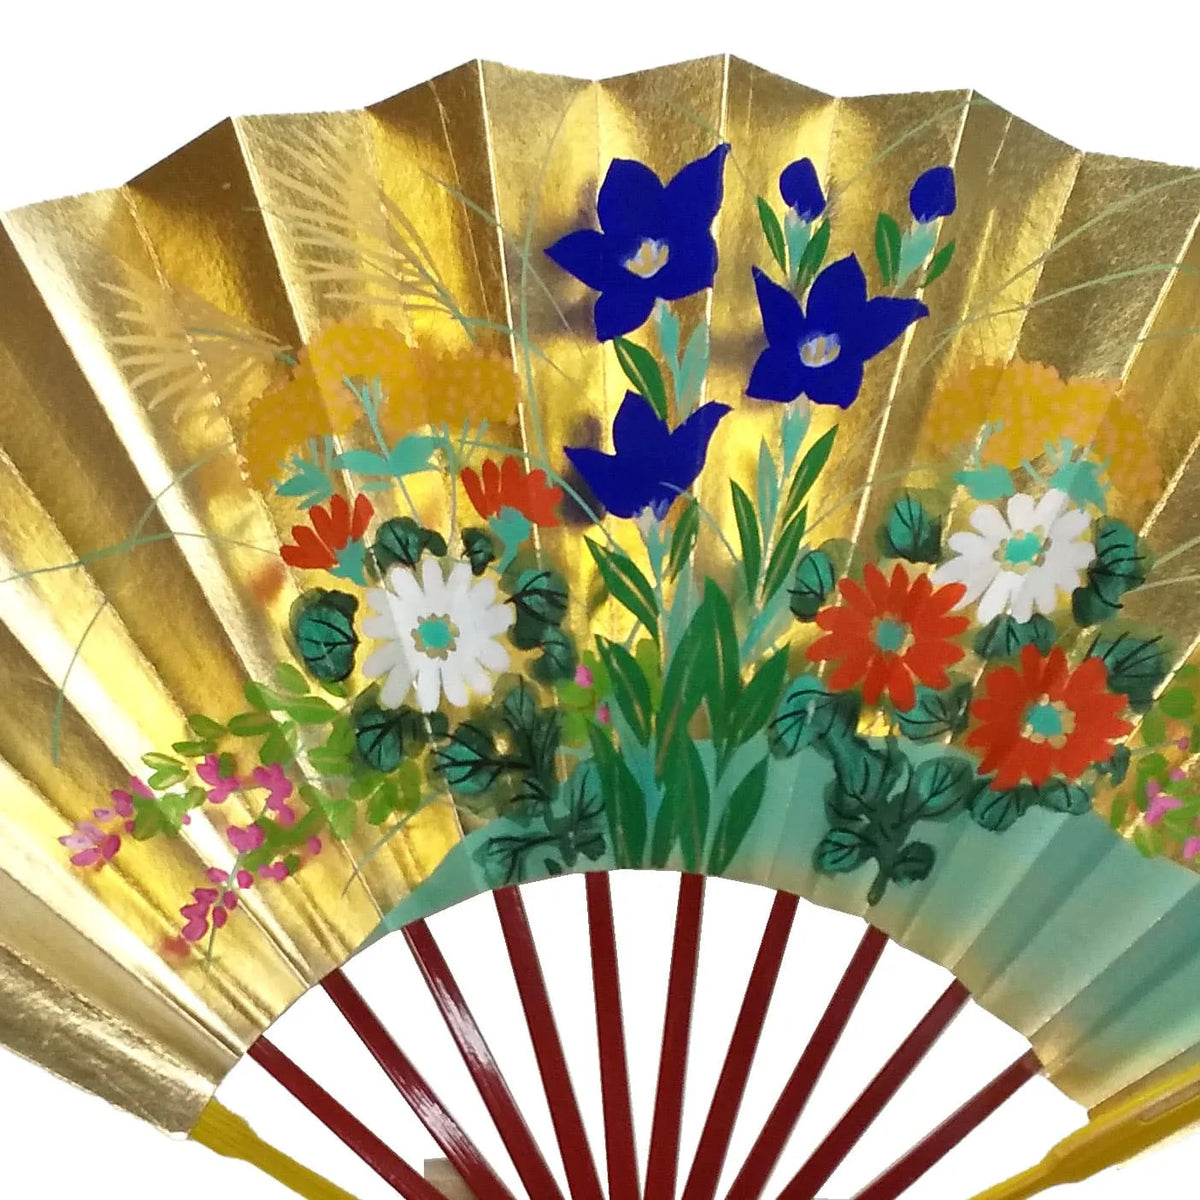 Autumn: Decorative fan, autumn grass, with fan stand and box